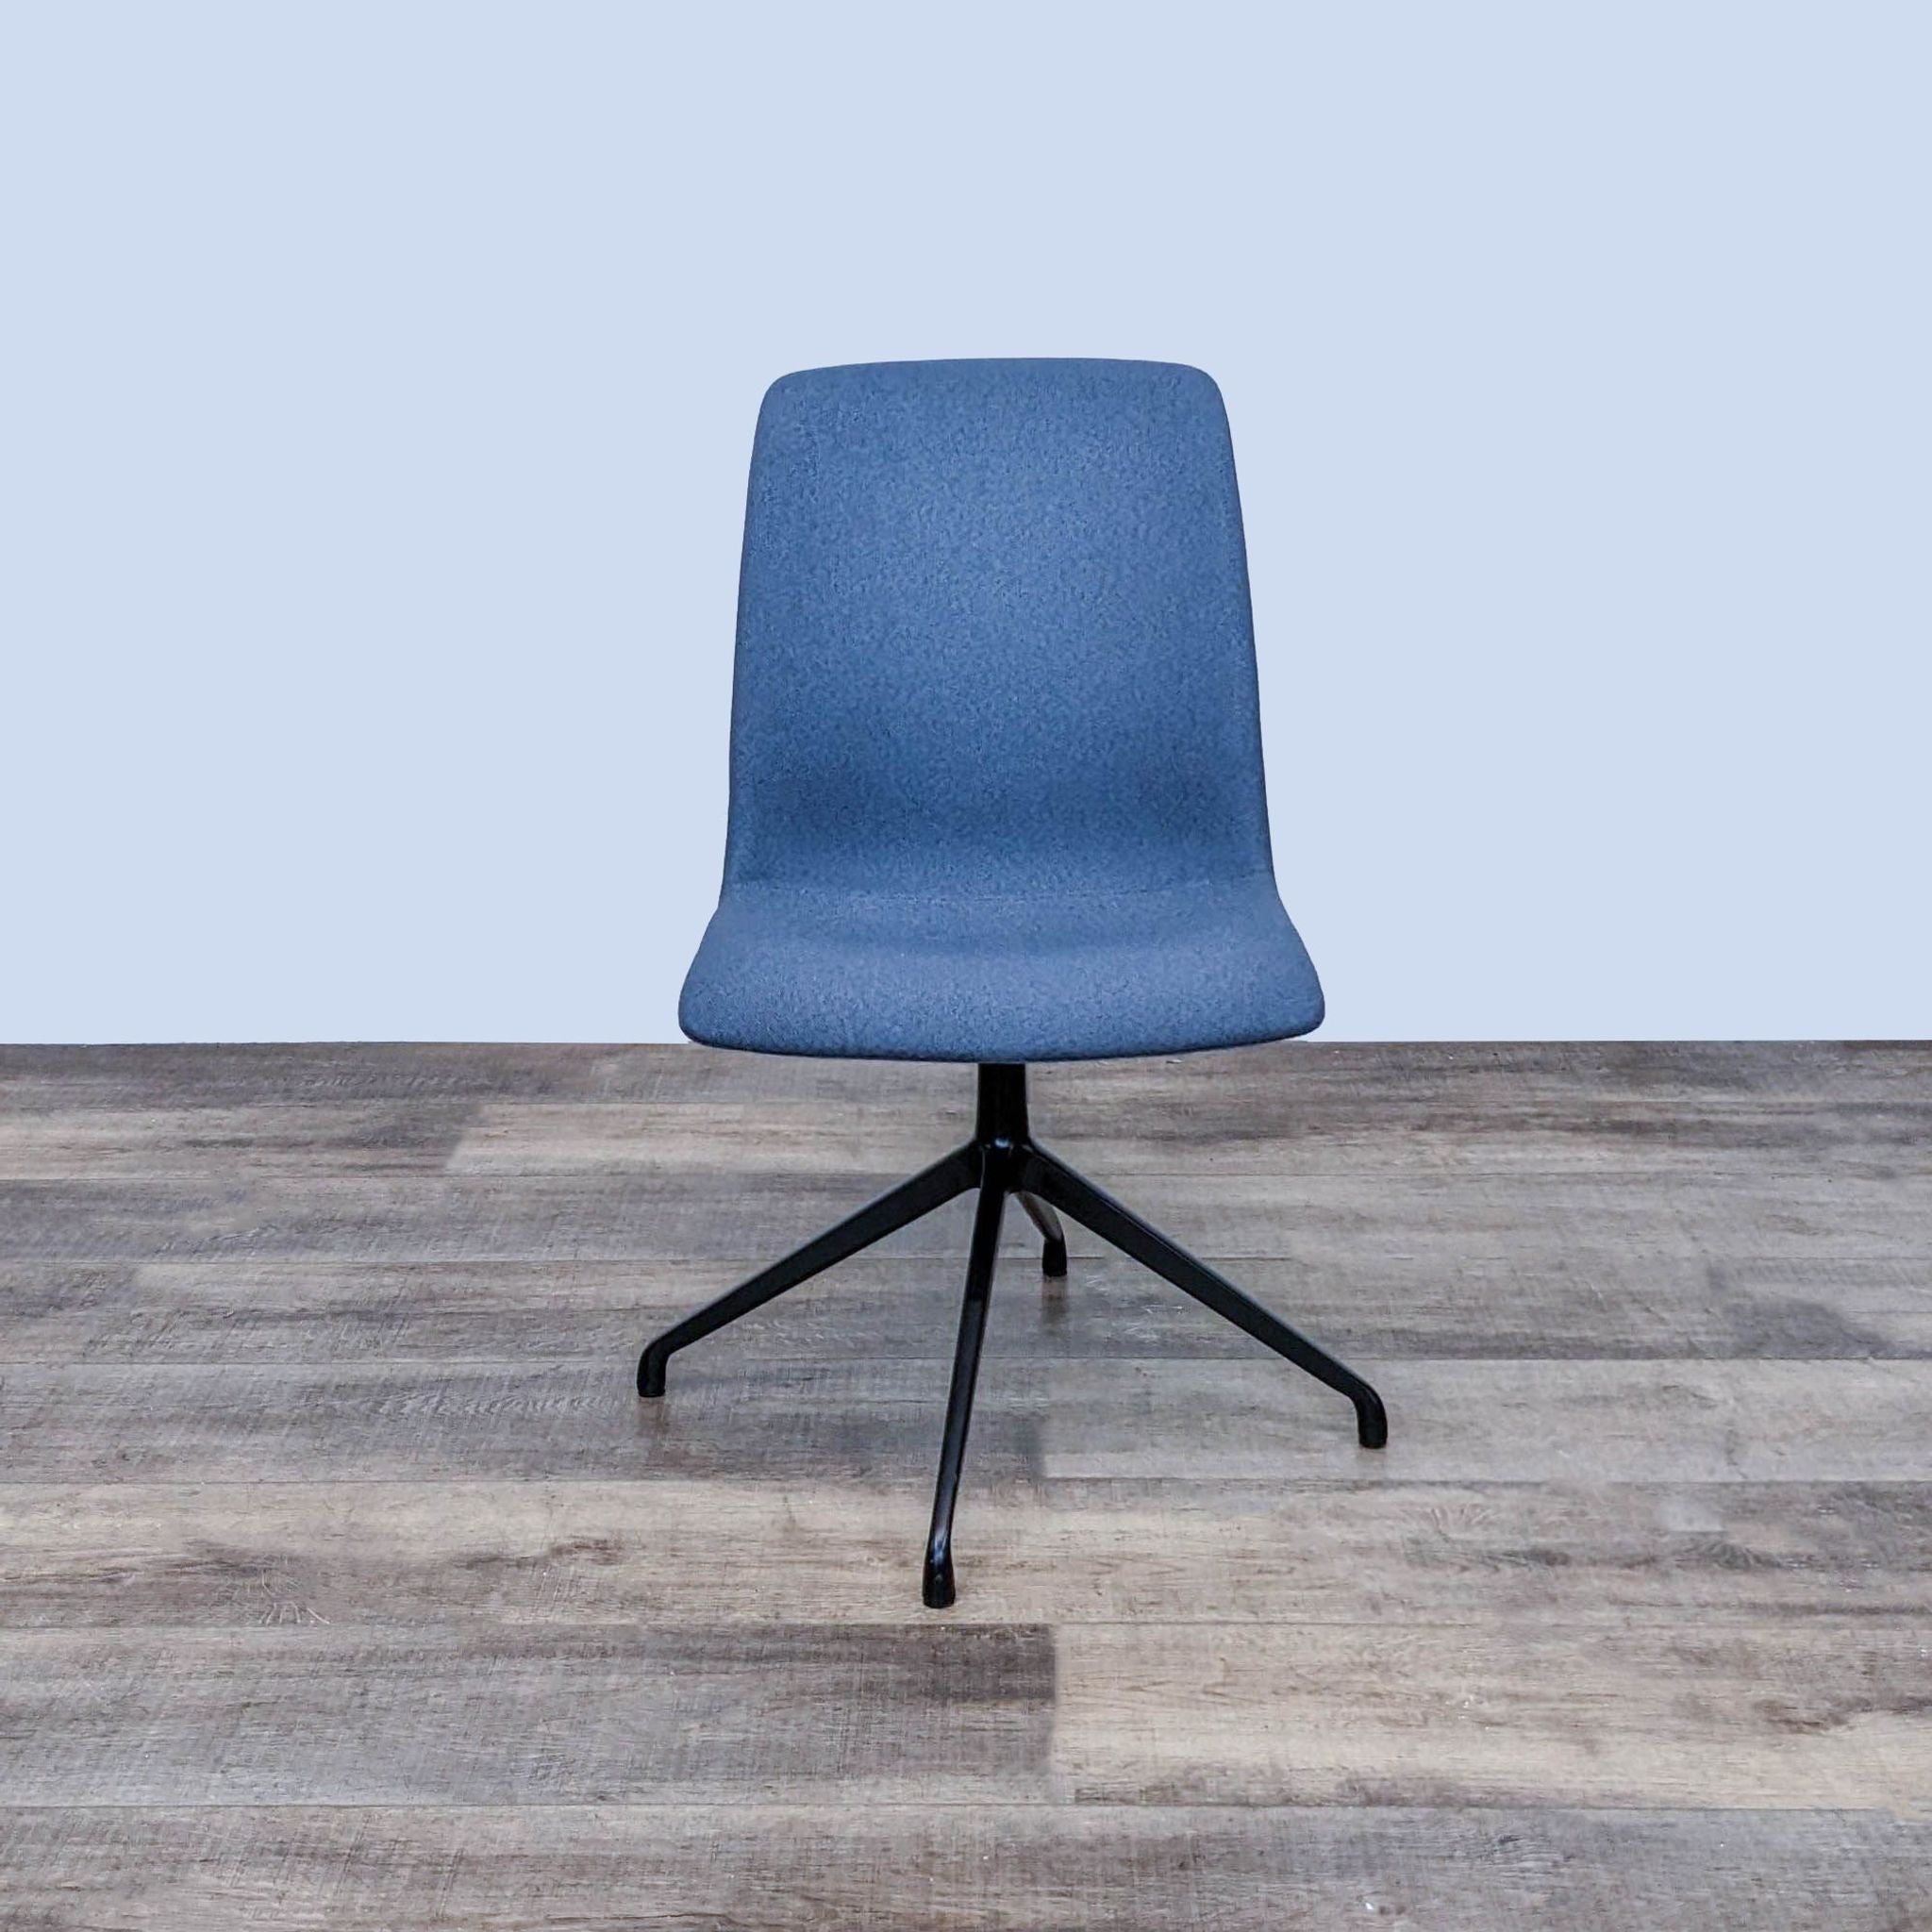 OFS brand Hairpin side chair with blue upholstered ergonomic seat and black steel base on a wooden floor.